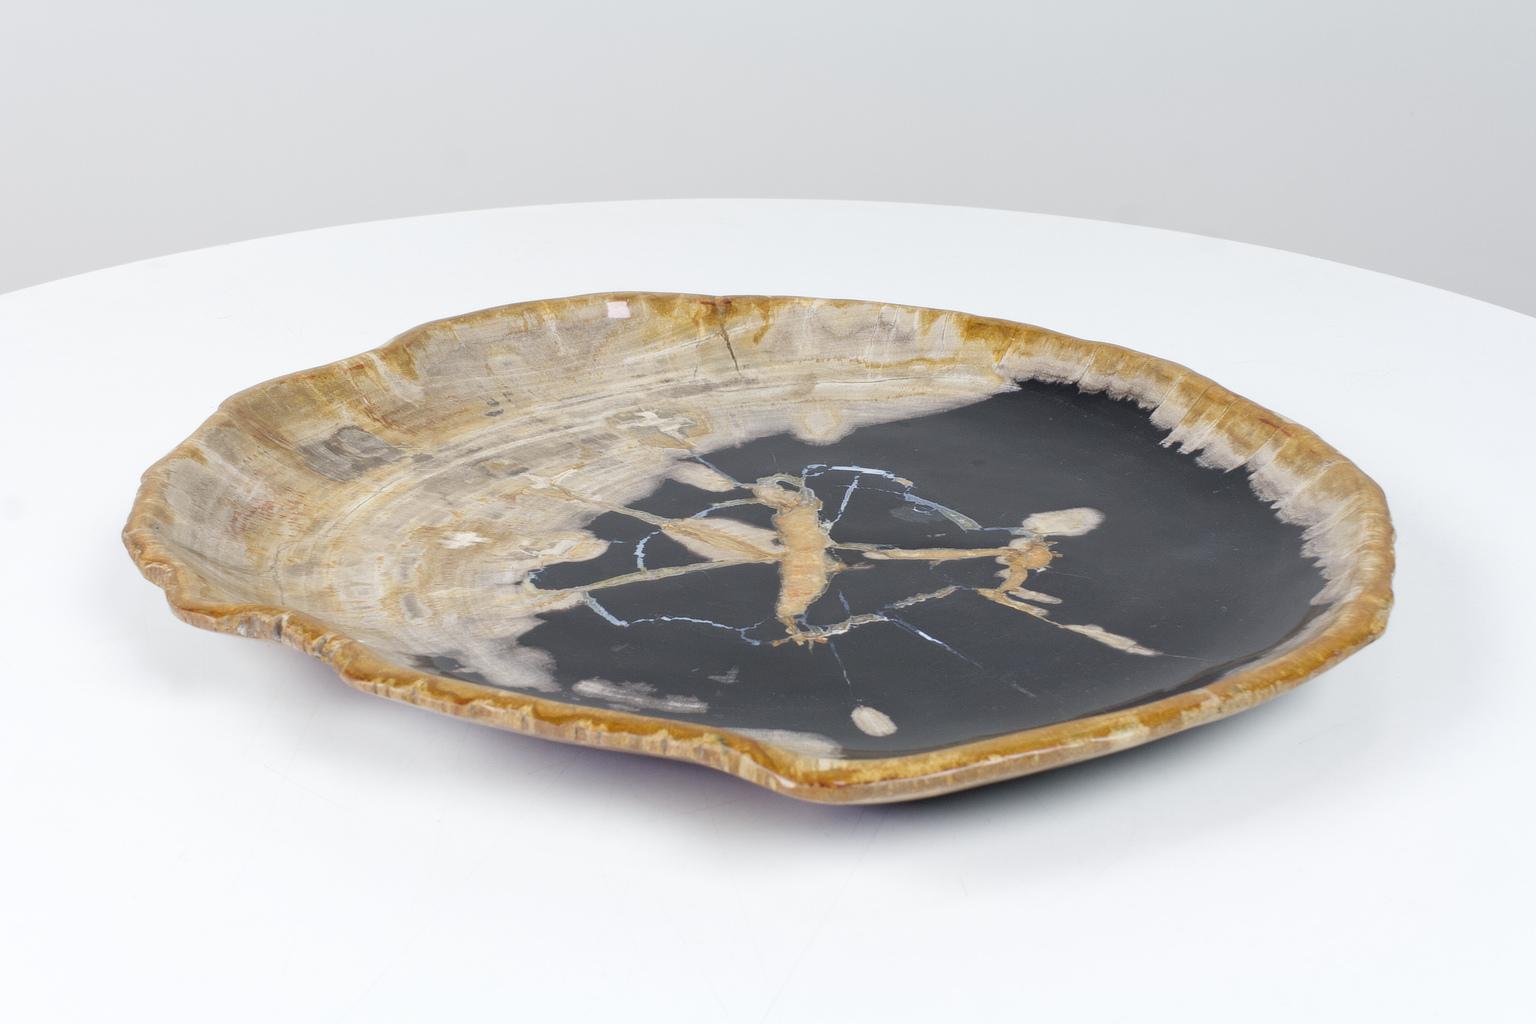 This large petrified wooden platter is an item of ancient organic origin. The material is smooth sanded on both sides. The black and beige tones of the object are a natural result of the organic process of petrification. The listed item is of